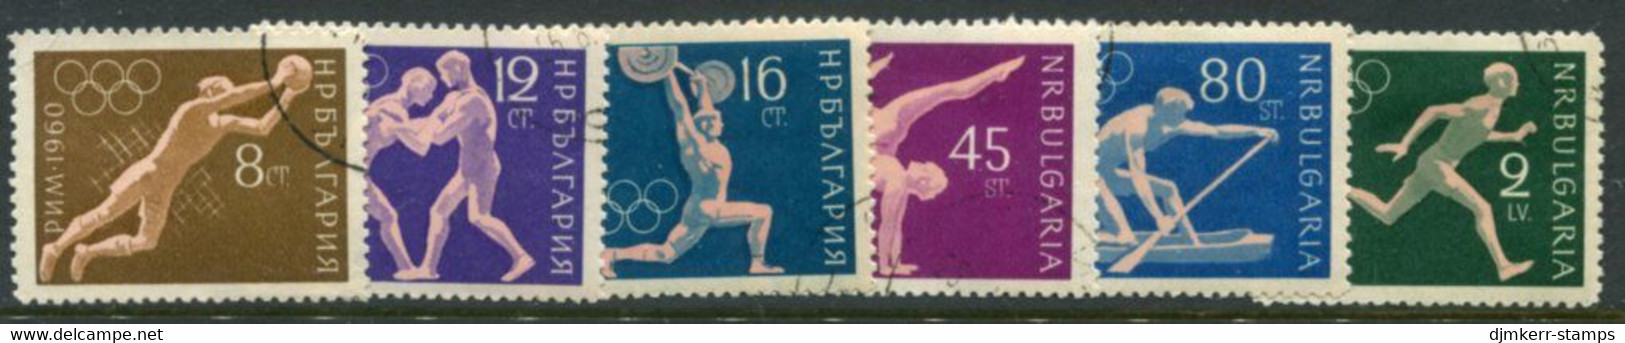 BULGARIA 1960 Olympic Games Perforated Used.  Michel 1172-77 - Usados